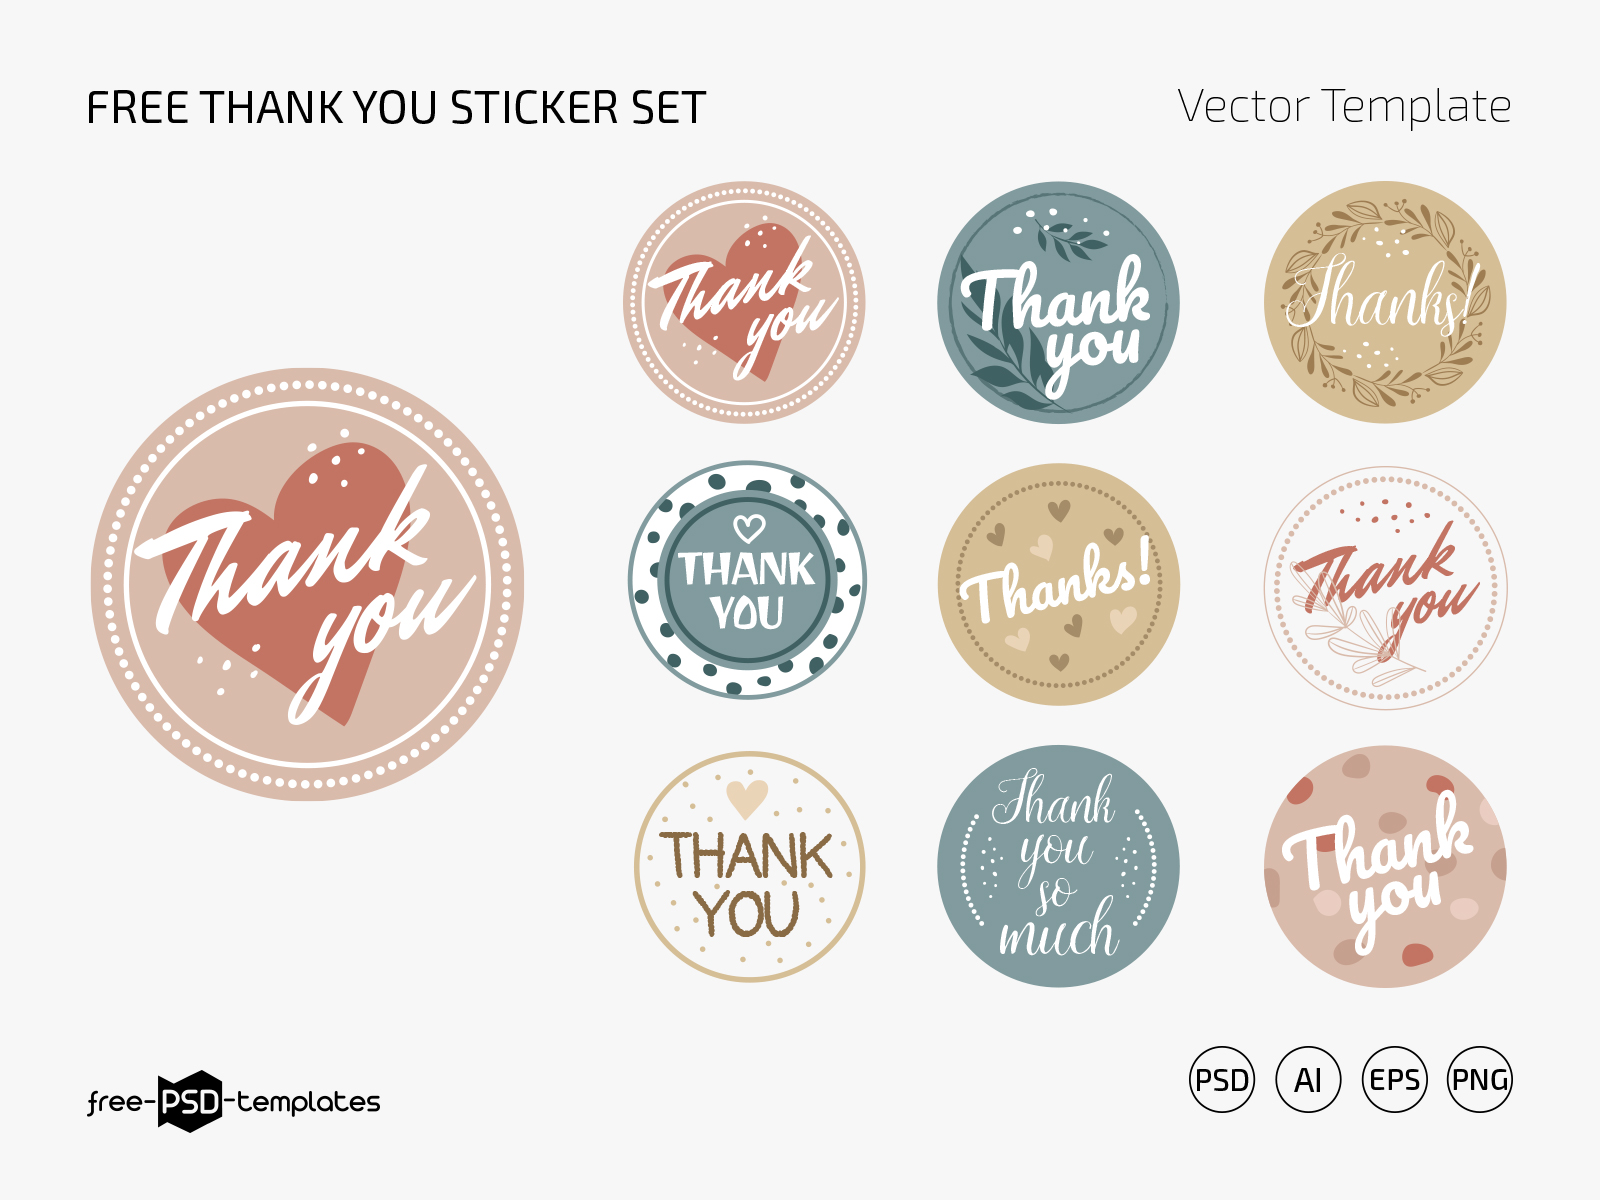 Thank You Stickers :: Behance